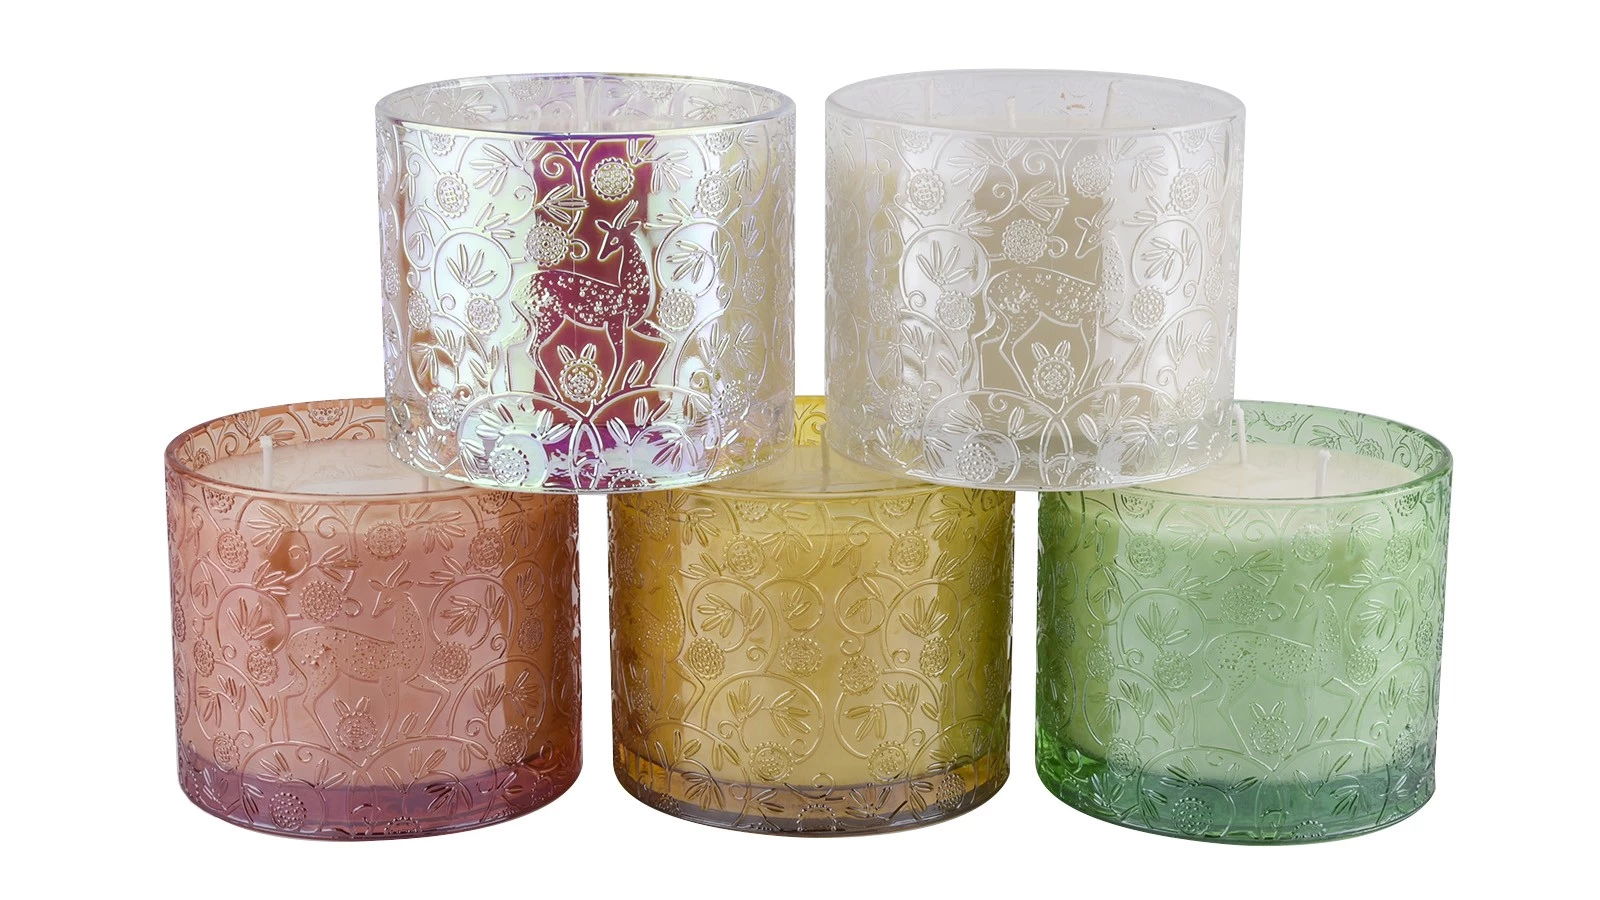 Wholesale reds deer pattern glass candle jars with lids